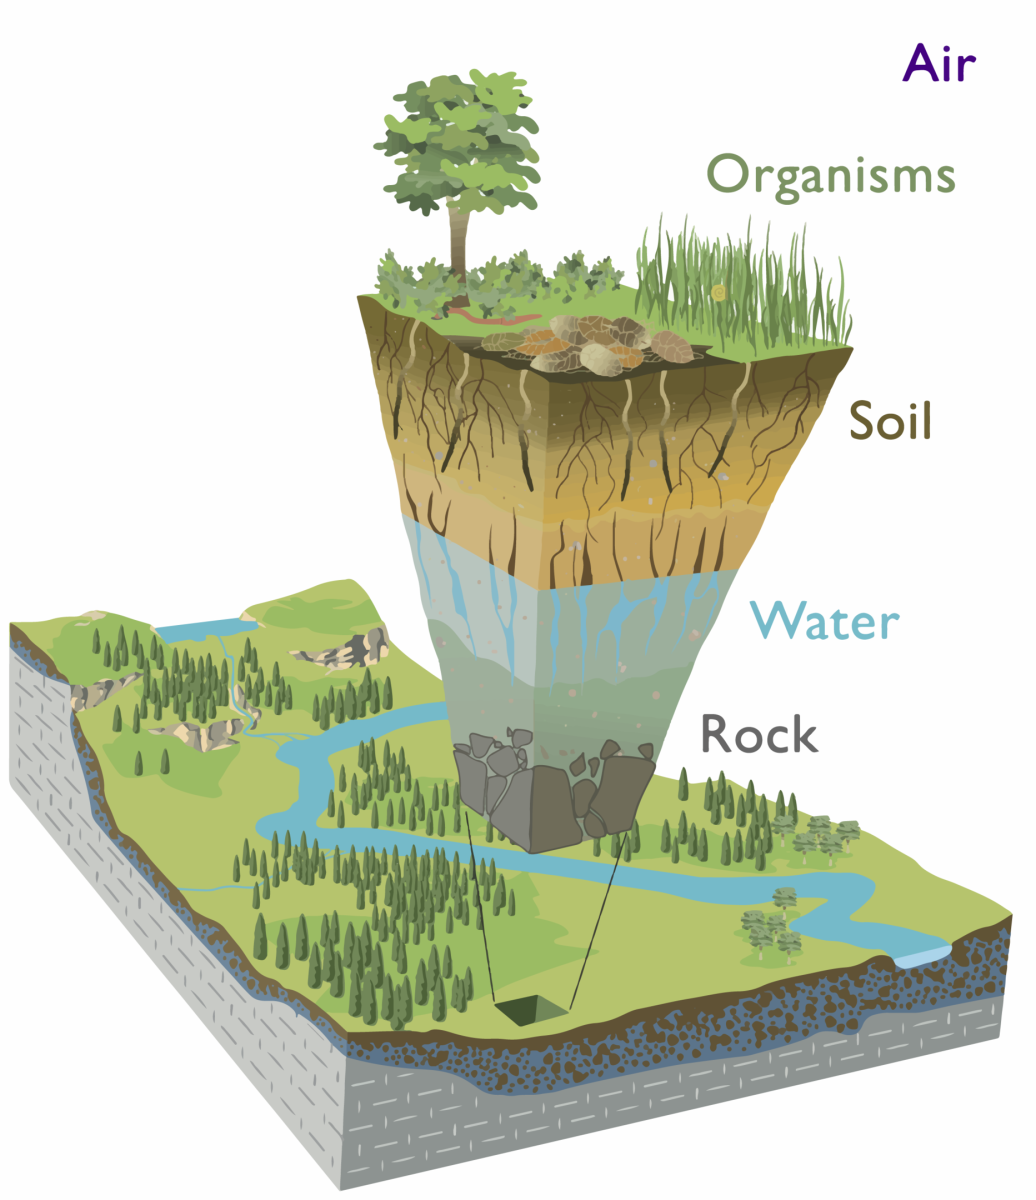 A diagram of the Critical Zone with labels “Air,” “Organisms,” “Soil,” “Water,” and “Rock.”